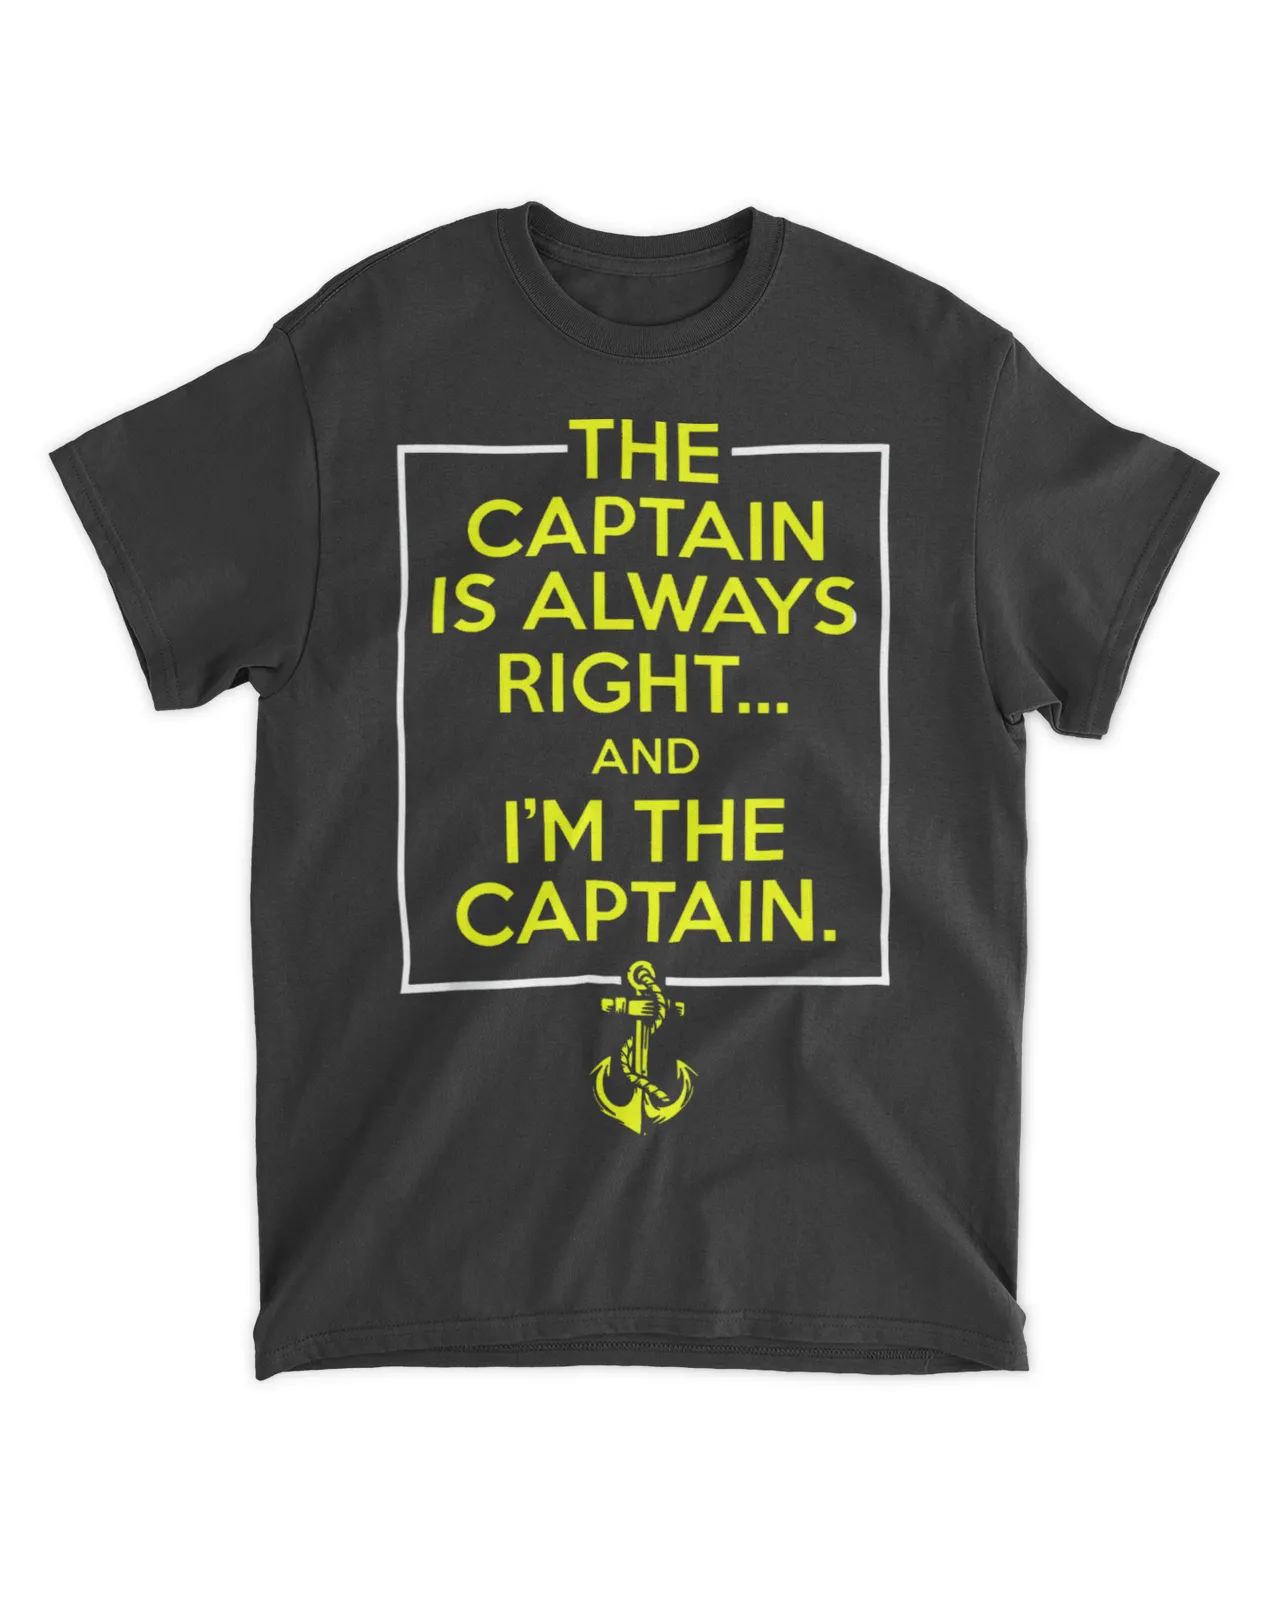  The captain is always right and i'm the captain shirt